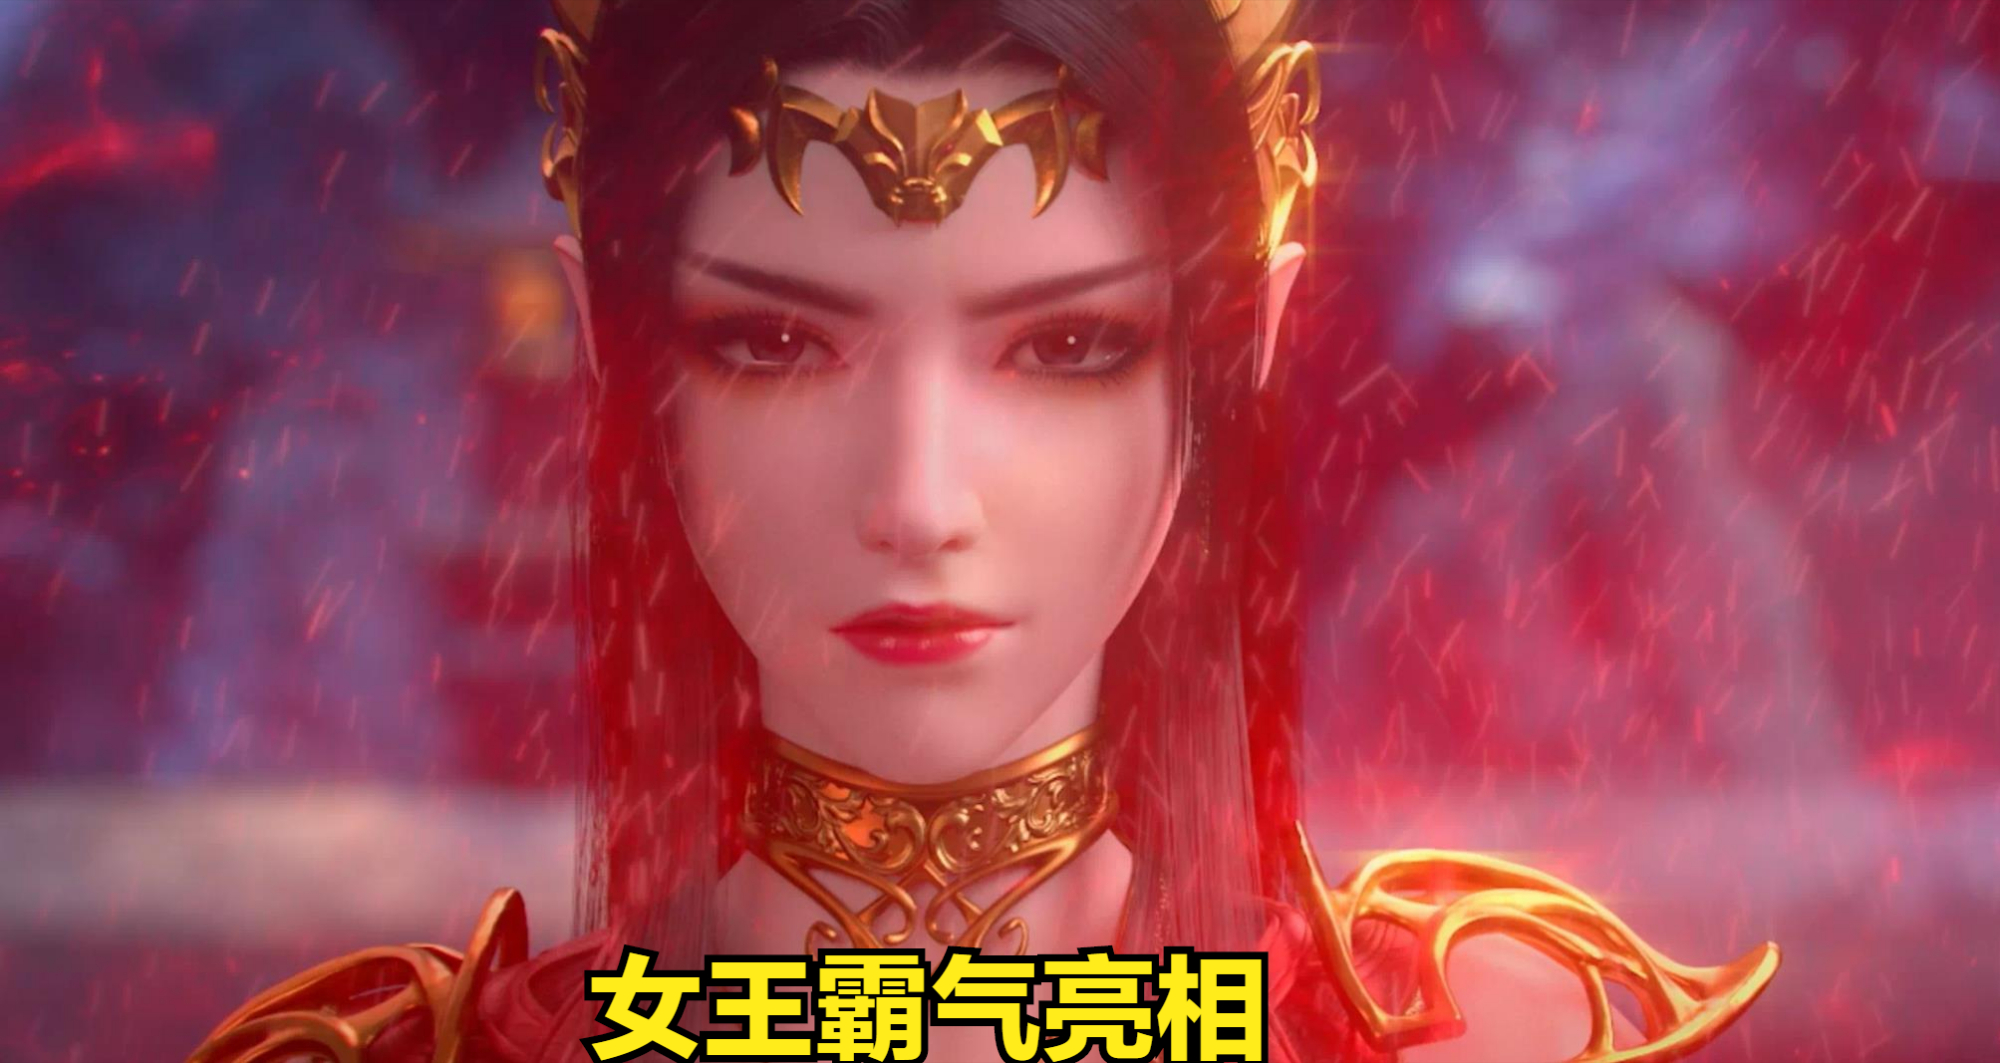 President Xiao Yan holds Medusa in hand, and the queen becomes a ...